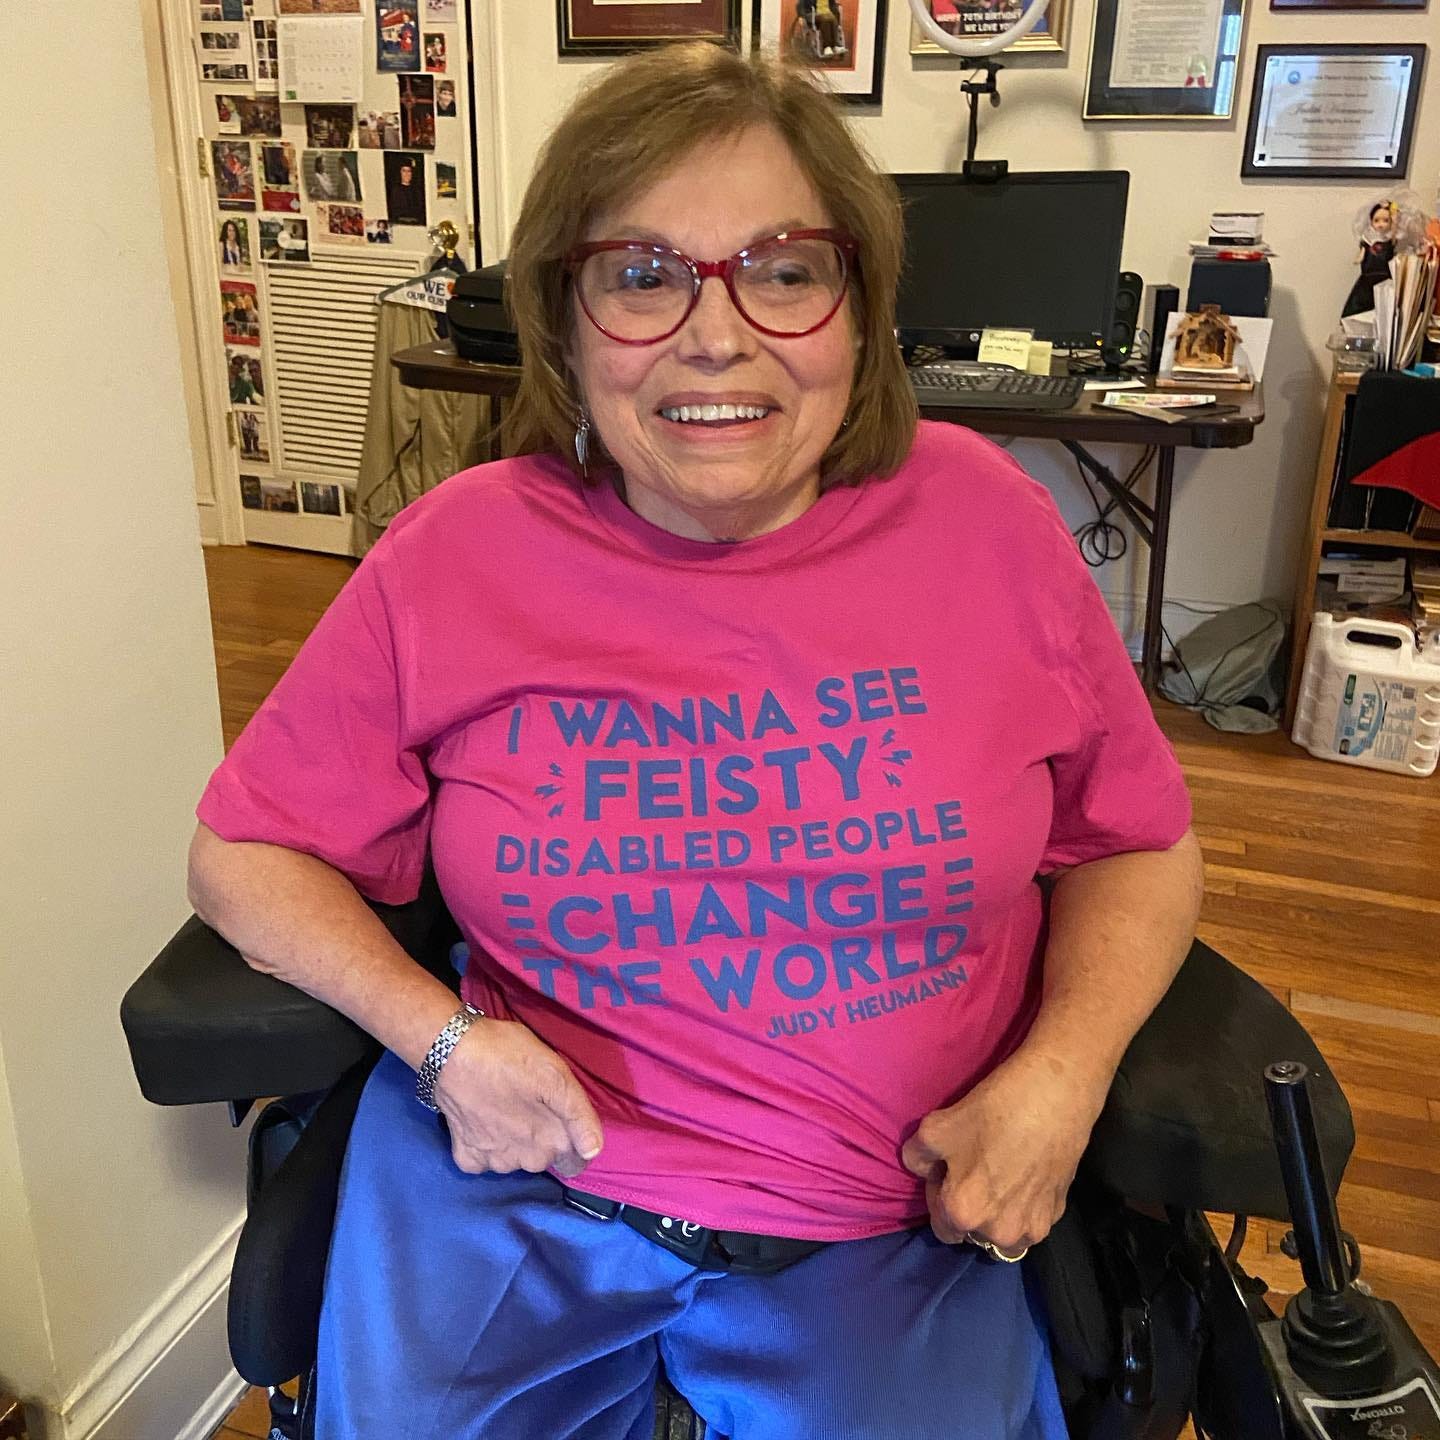 Judy wearing a pink shirt that reads her quote "I wanna see feisty disabled people change the world."